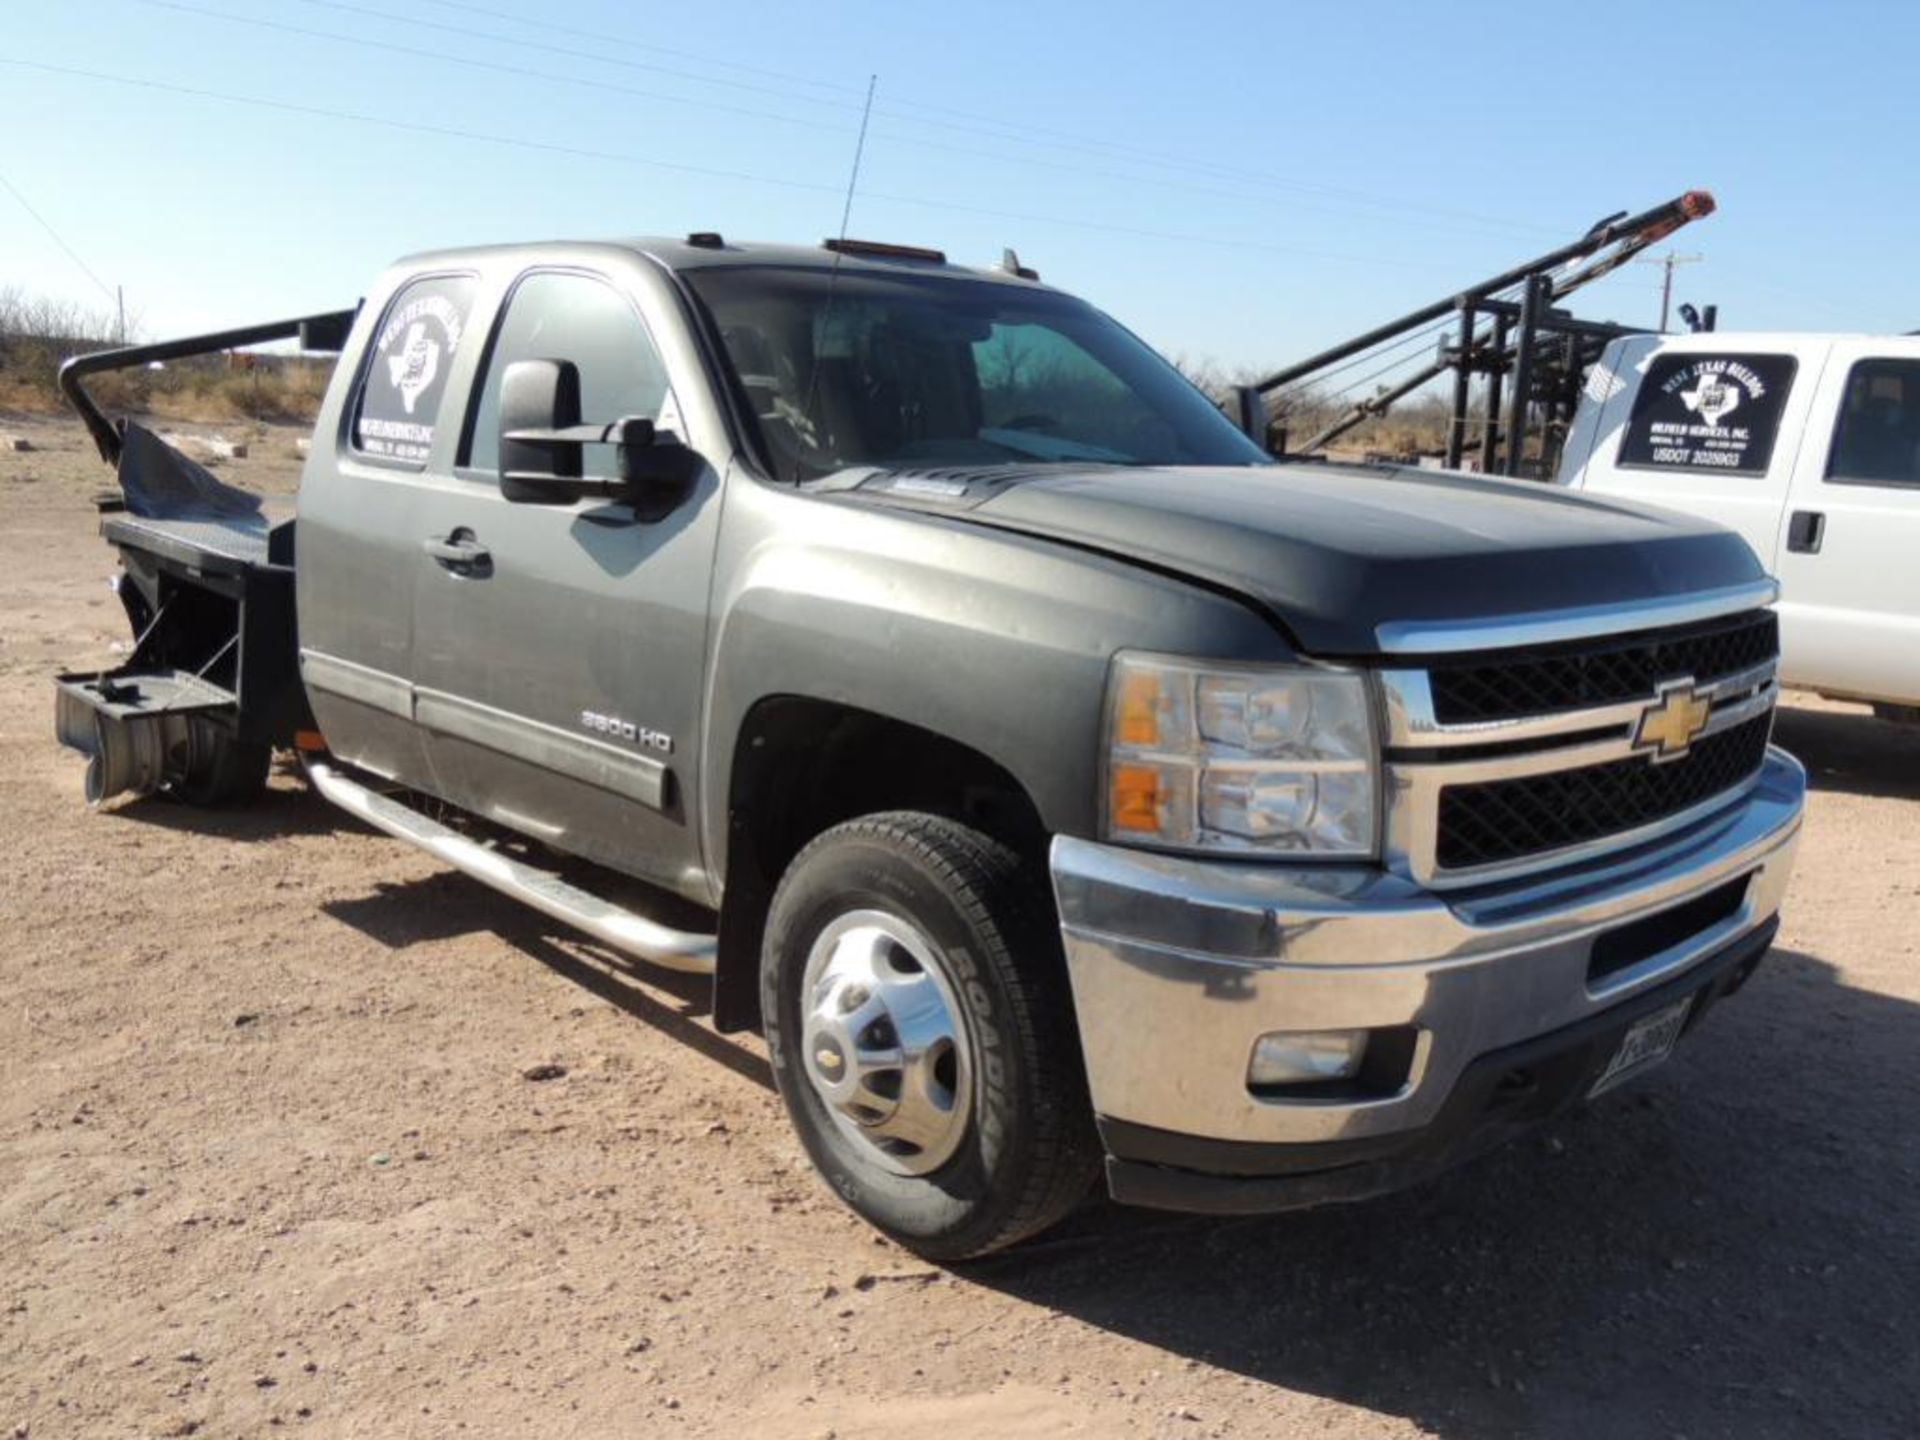 2011 Chevrolet 3500 HD Pick-up Truck, VIN 1GC5K0CG0BZ238129, Dually, Extended Cab, 8 ft. 6 in. Flat - Image 2 of 4